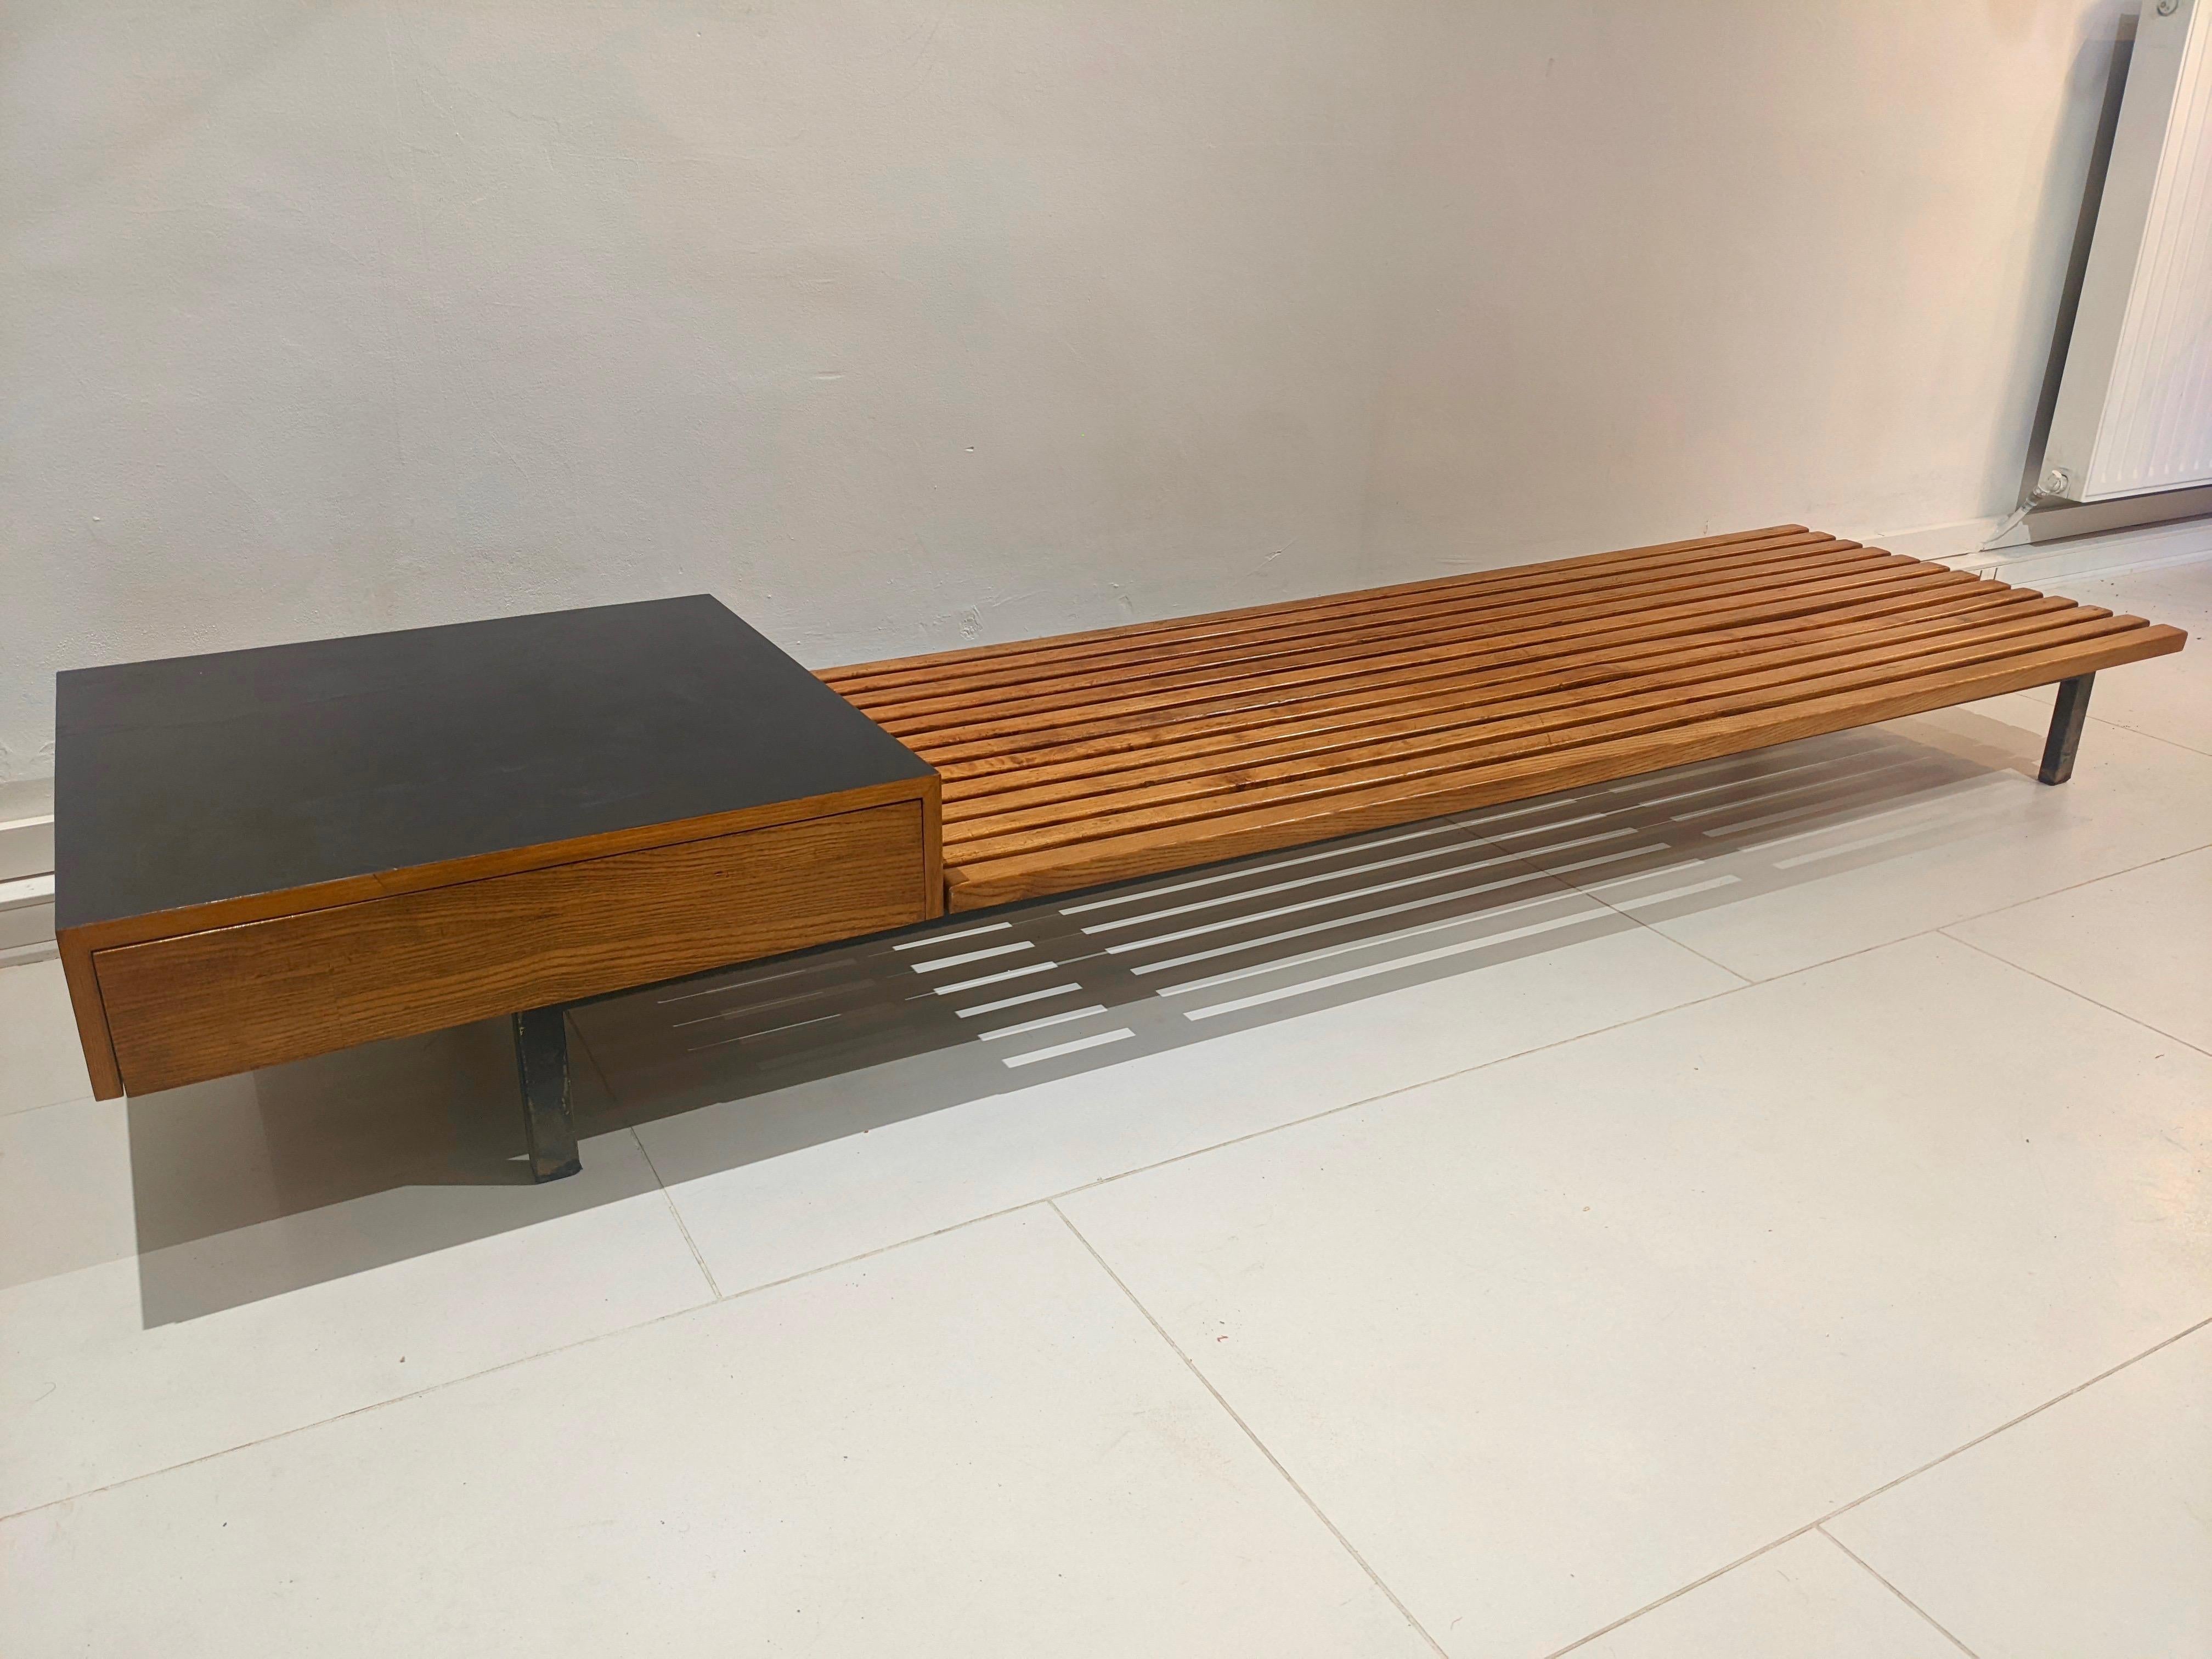 Cansado bench with drawers by Charlotte Perriand. Year 1954. Steph Simon edition. Good condition. 
Provenance : Cansado mining city, Mauritania, Africa.
Some defects are visible on the front of the drawer and on the melamine. (see pictures)